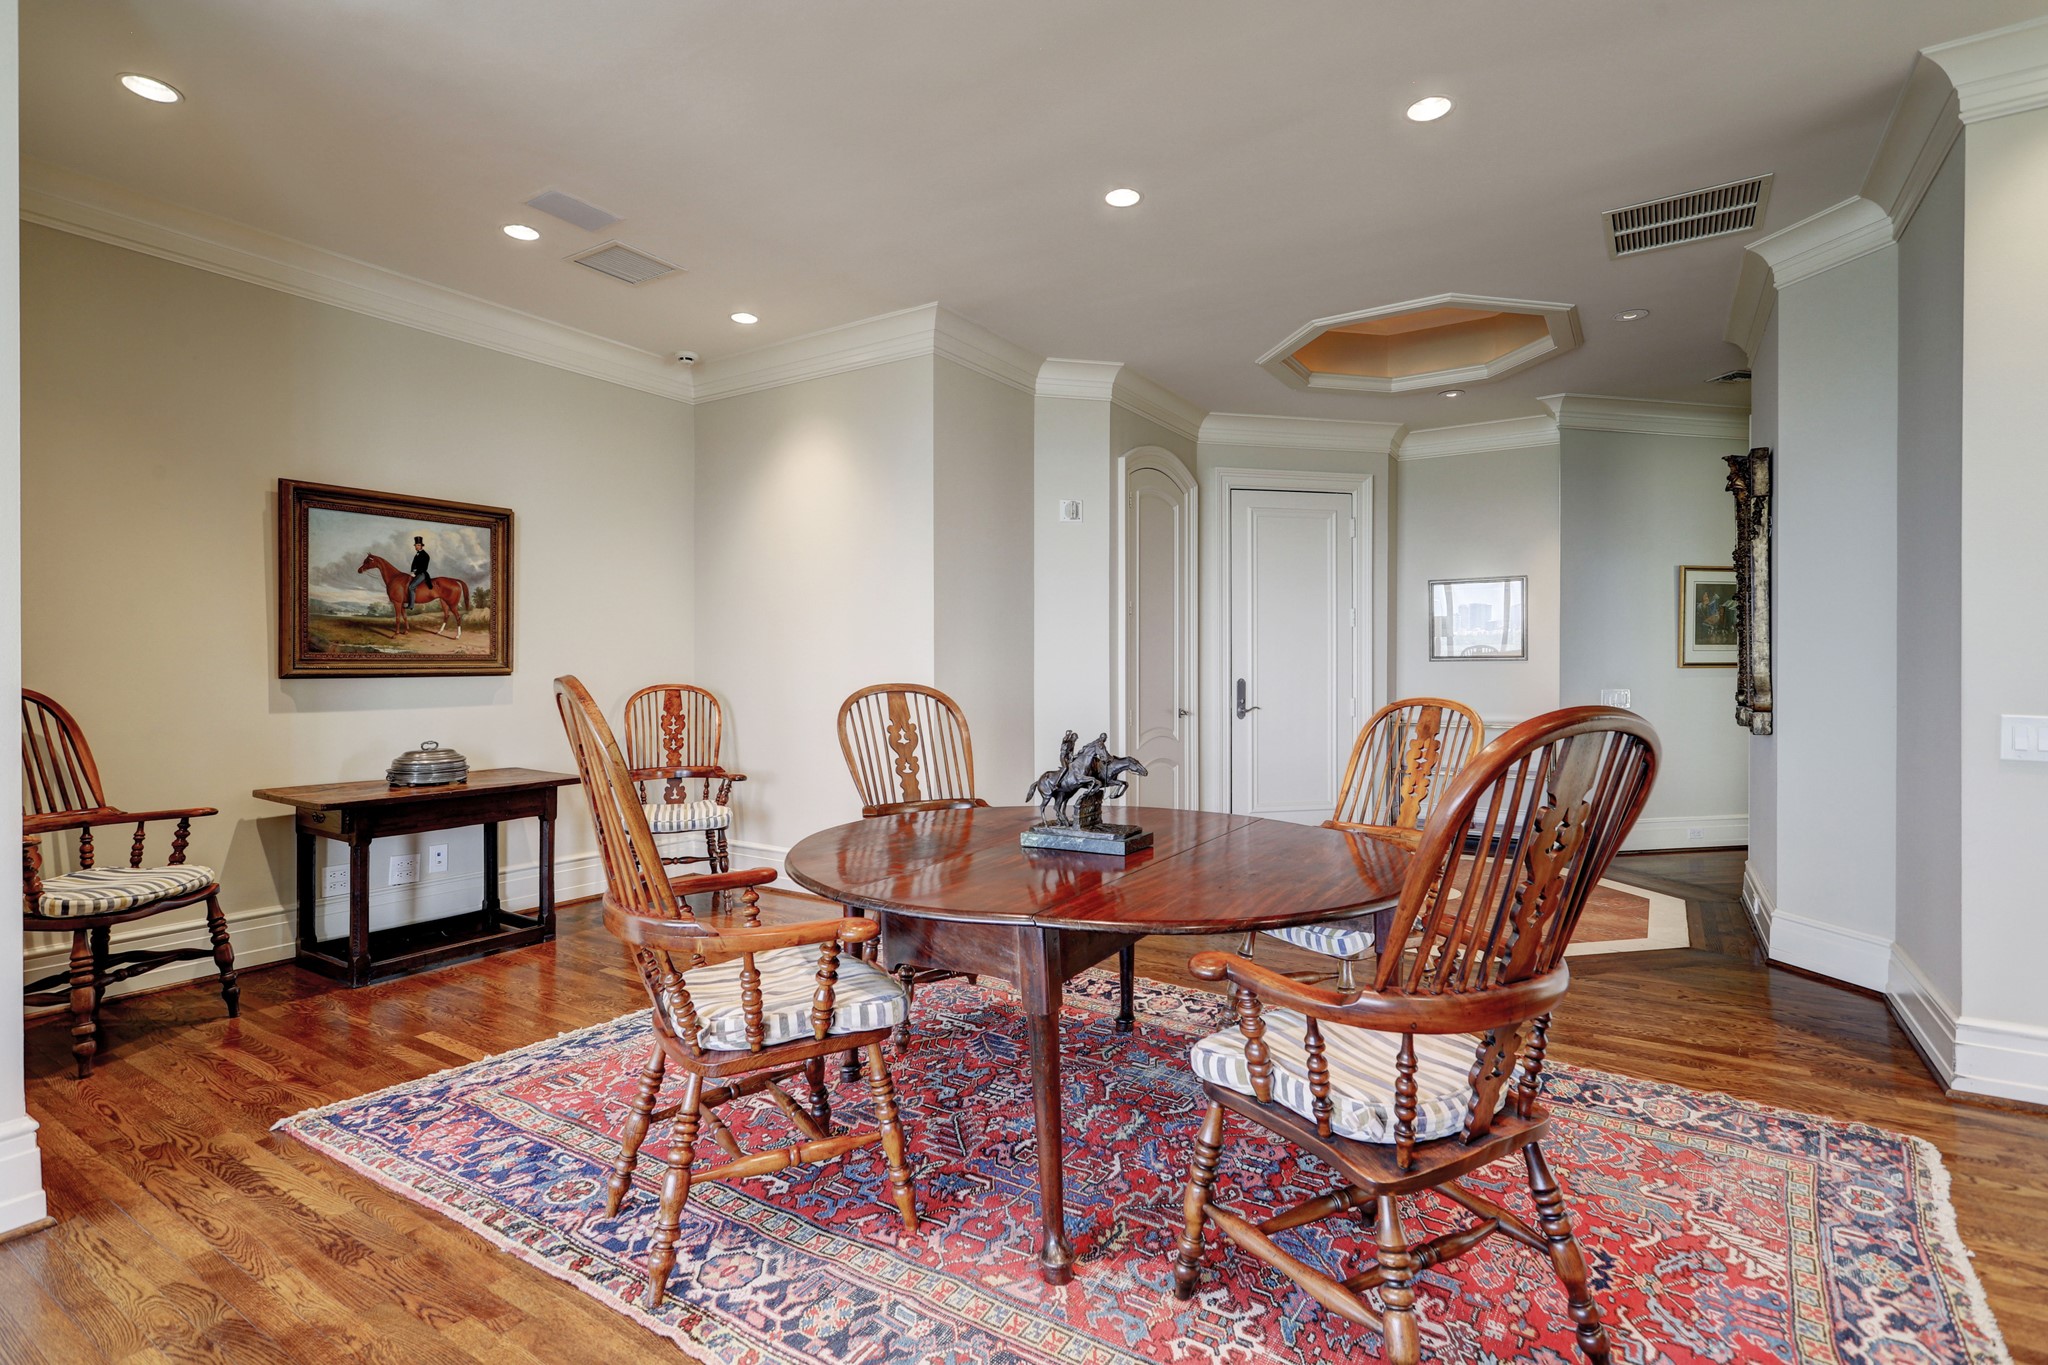 The dining and living area are light and open with views of River Oaks.